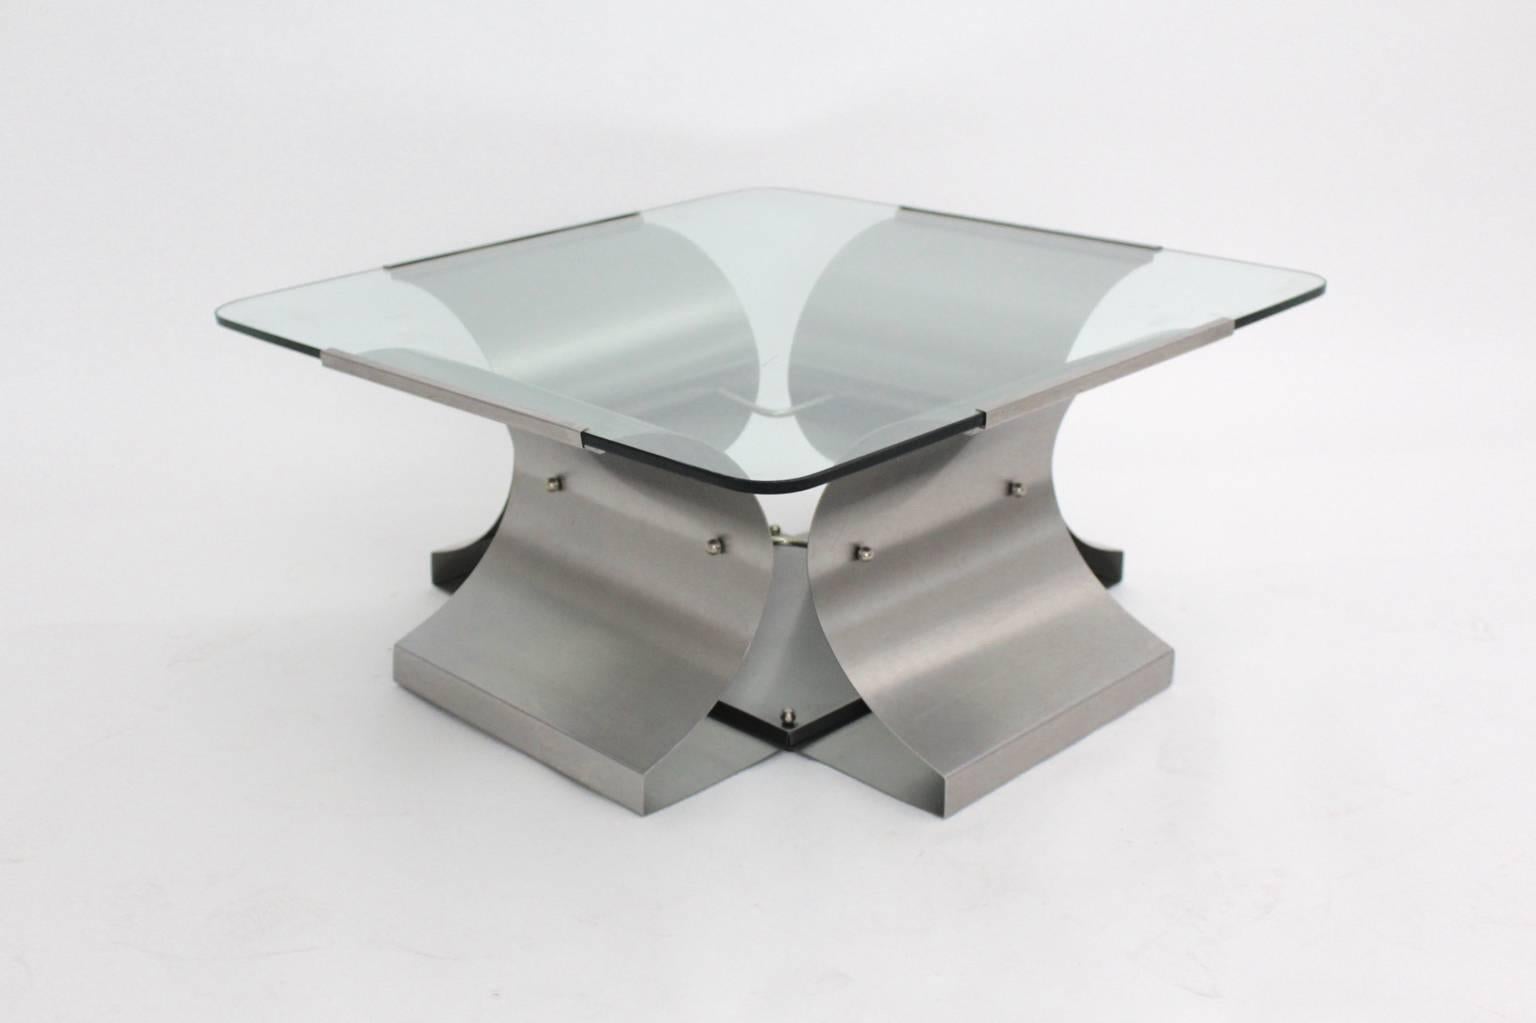 Space Age vintage metal coffee table by Francois Monnet 1970s France, which is a futuristic and extravagant coffee table.
The brushed stainless steel frame is topped with a glass top, which is surrounded and edged with metal clips.
The original